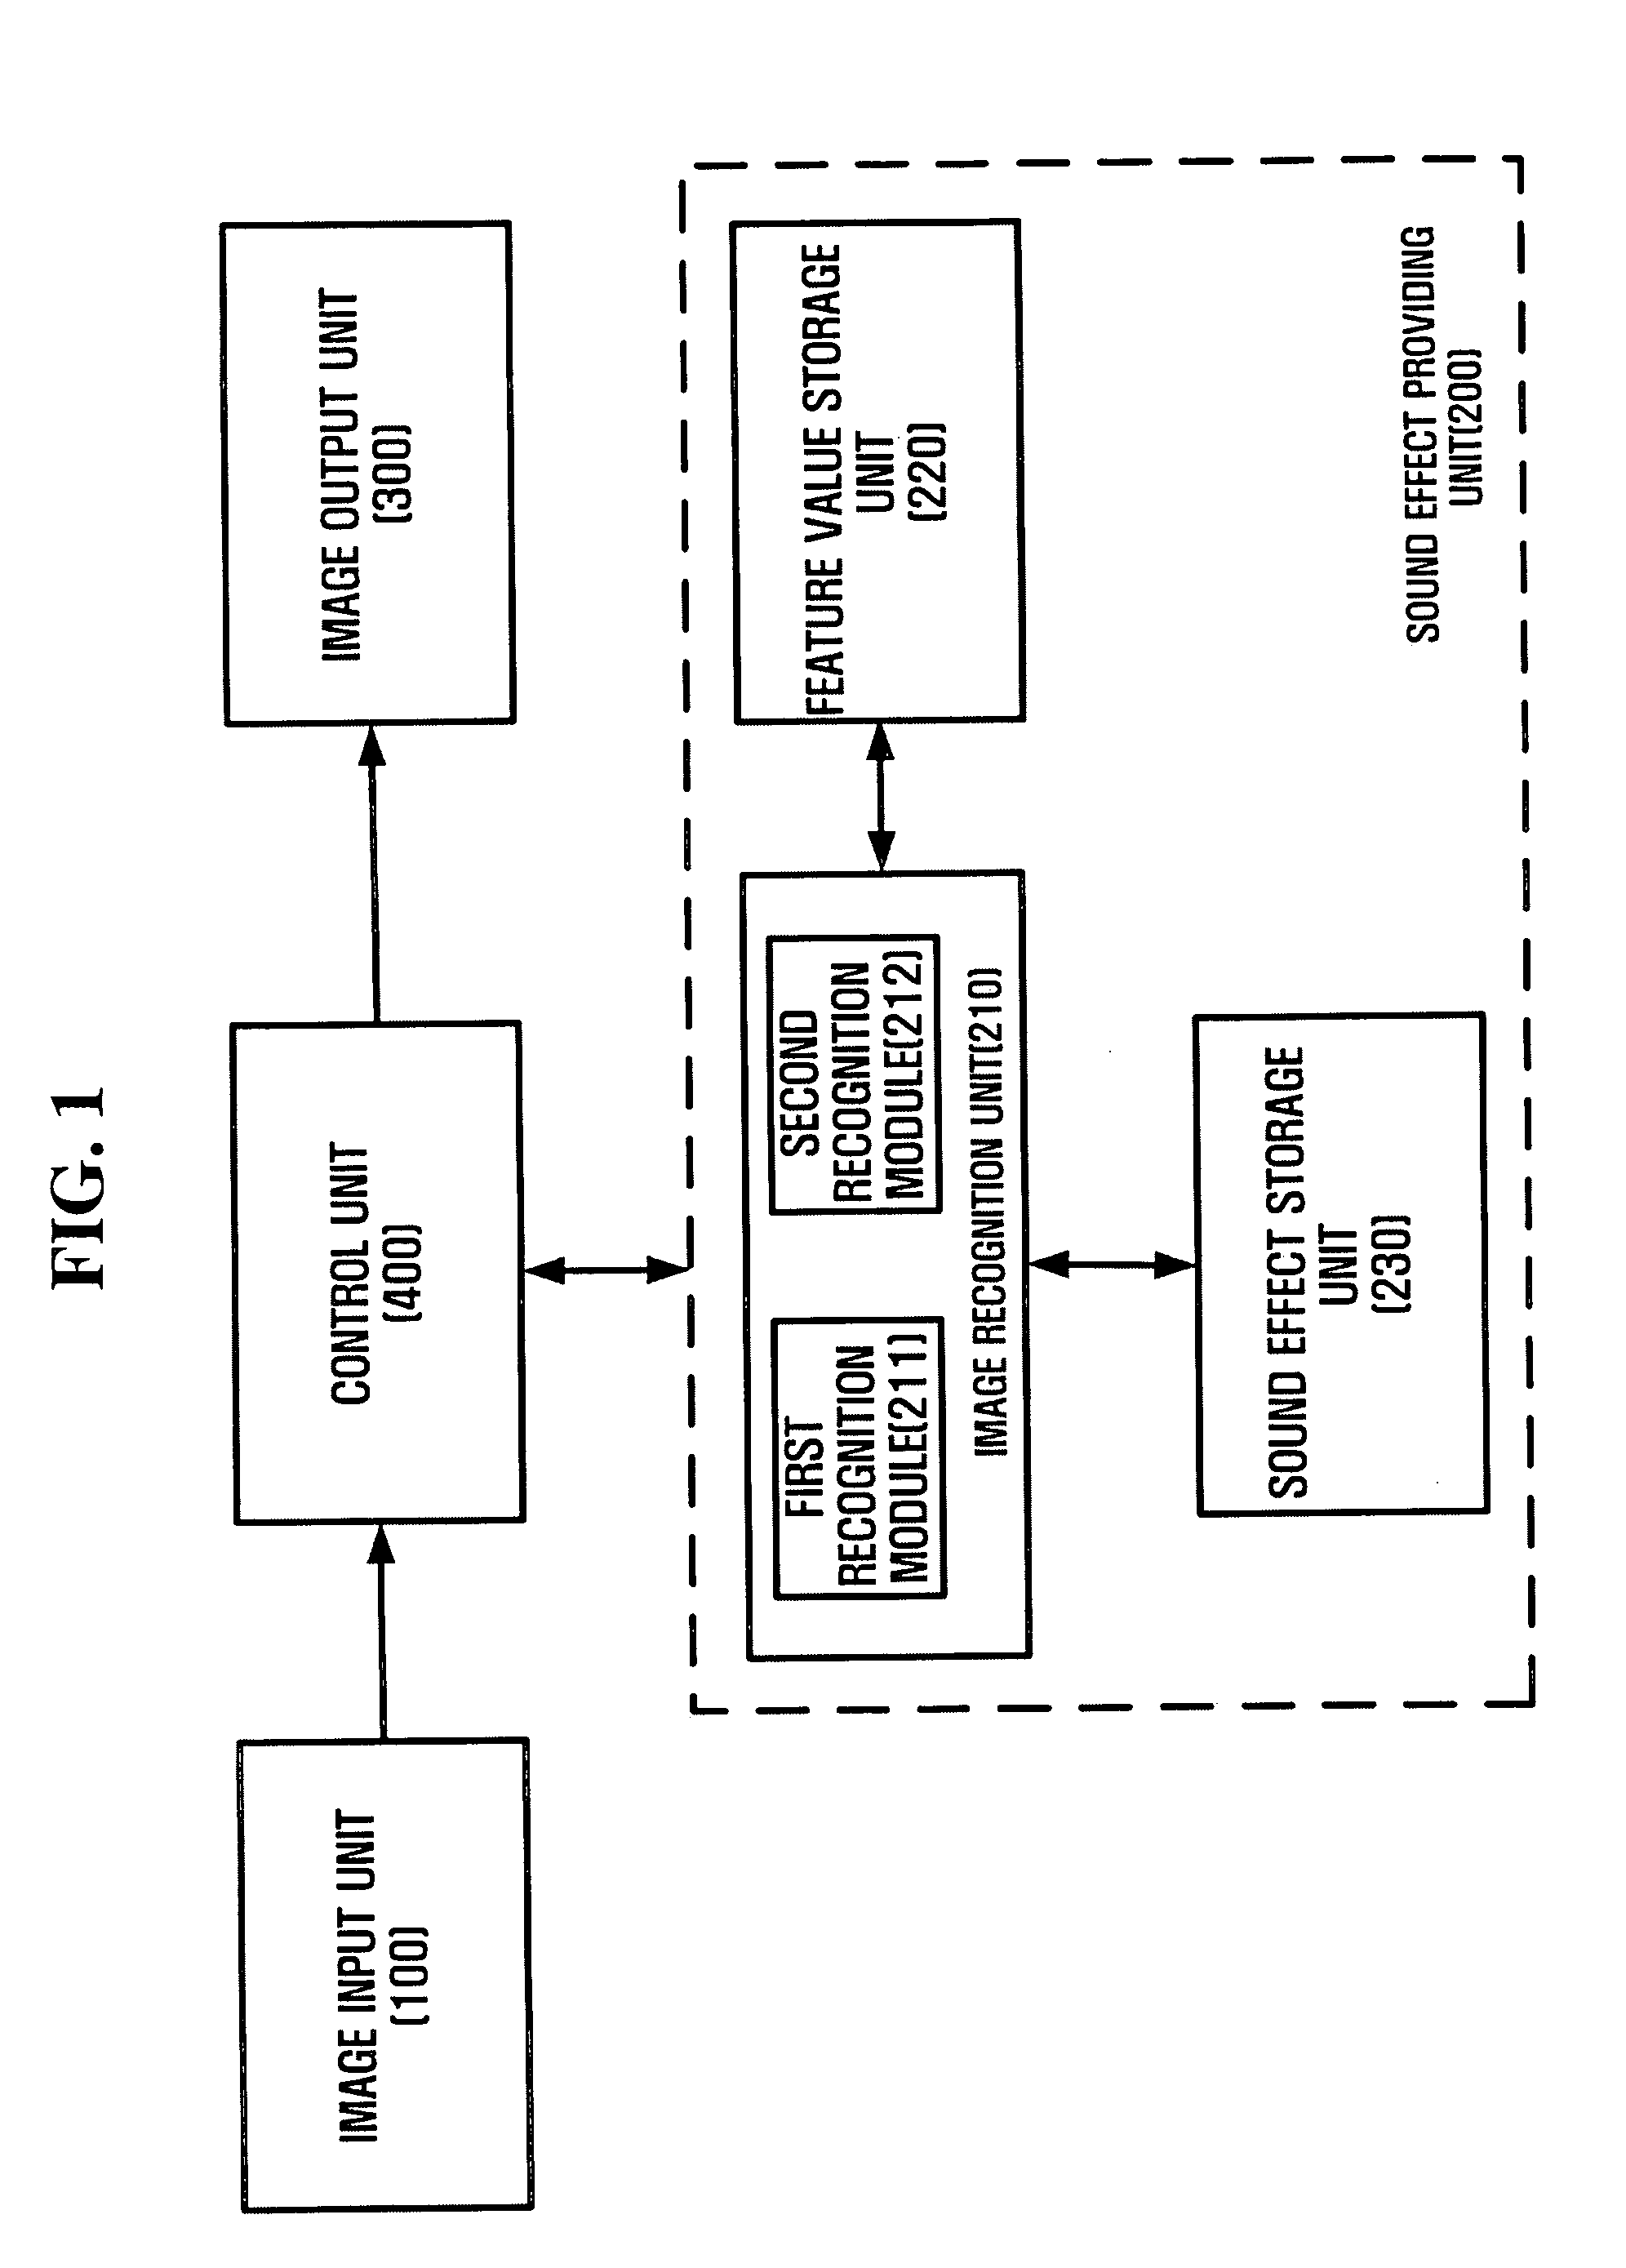 Apparatus for providing sound effects according to an image and method thereof